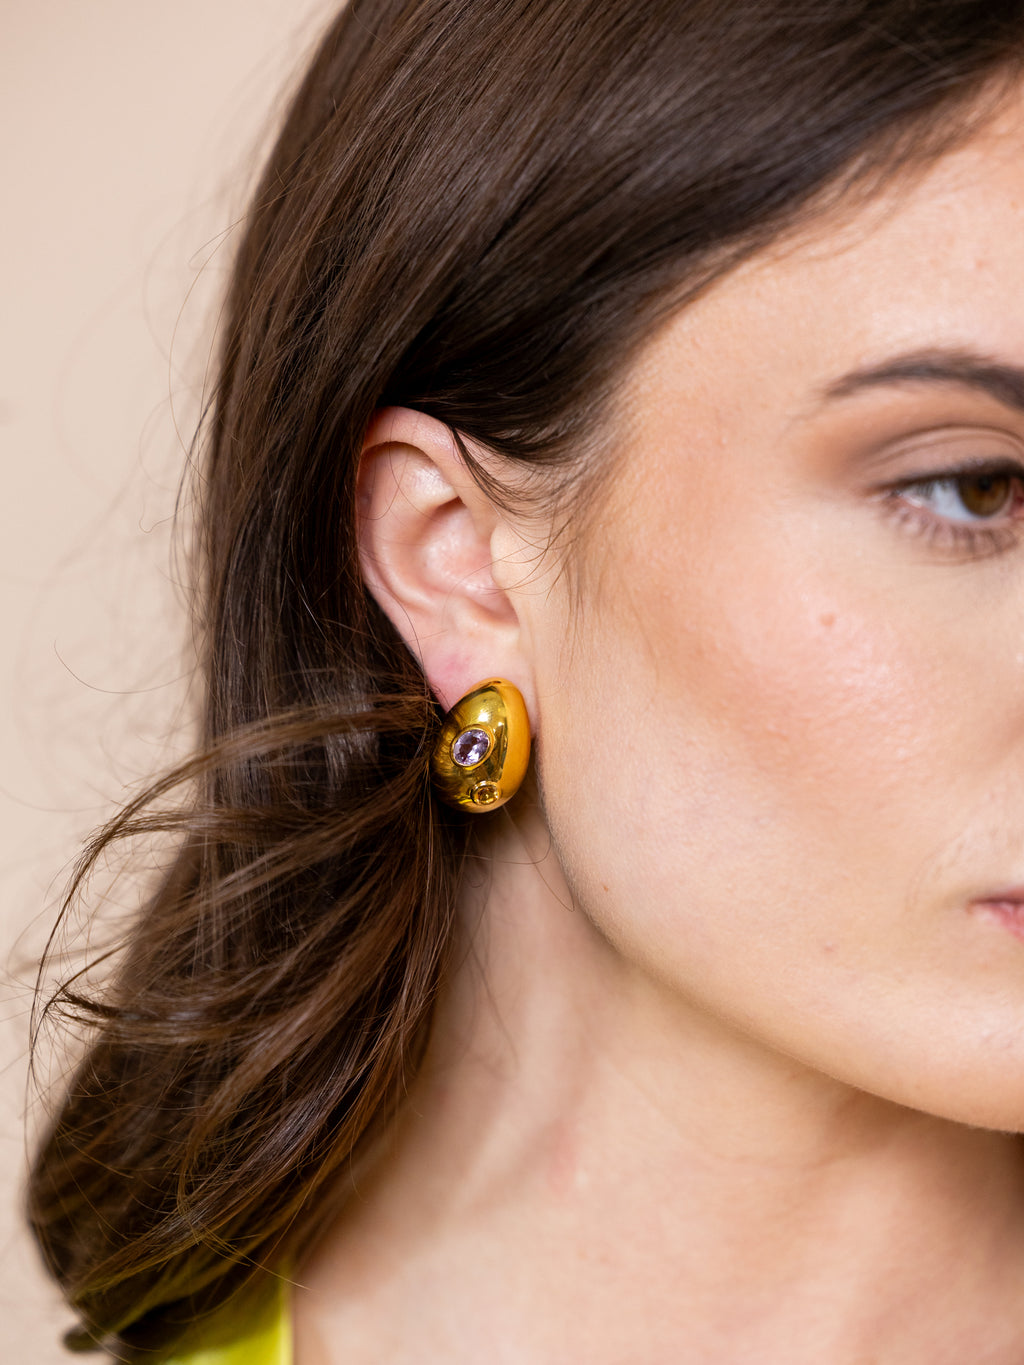 Woman wearing gold earrings with inlaid jewels.